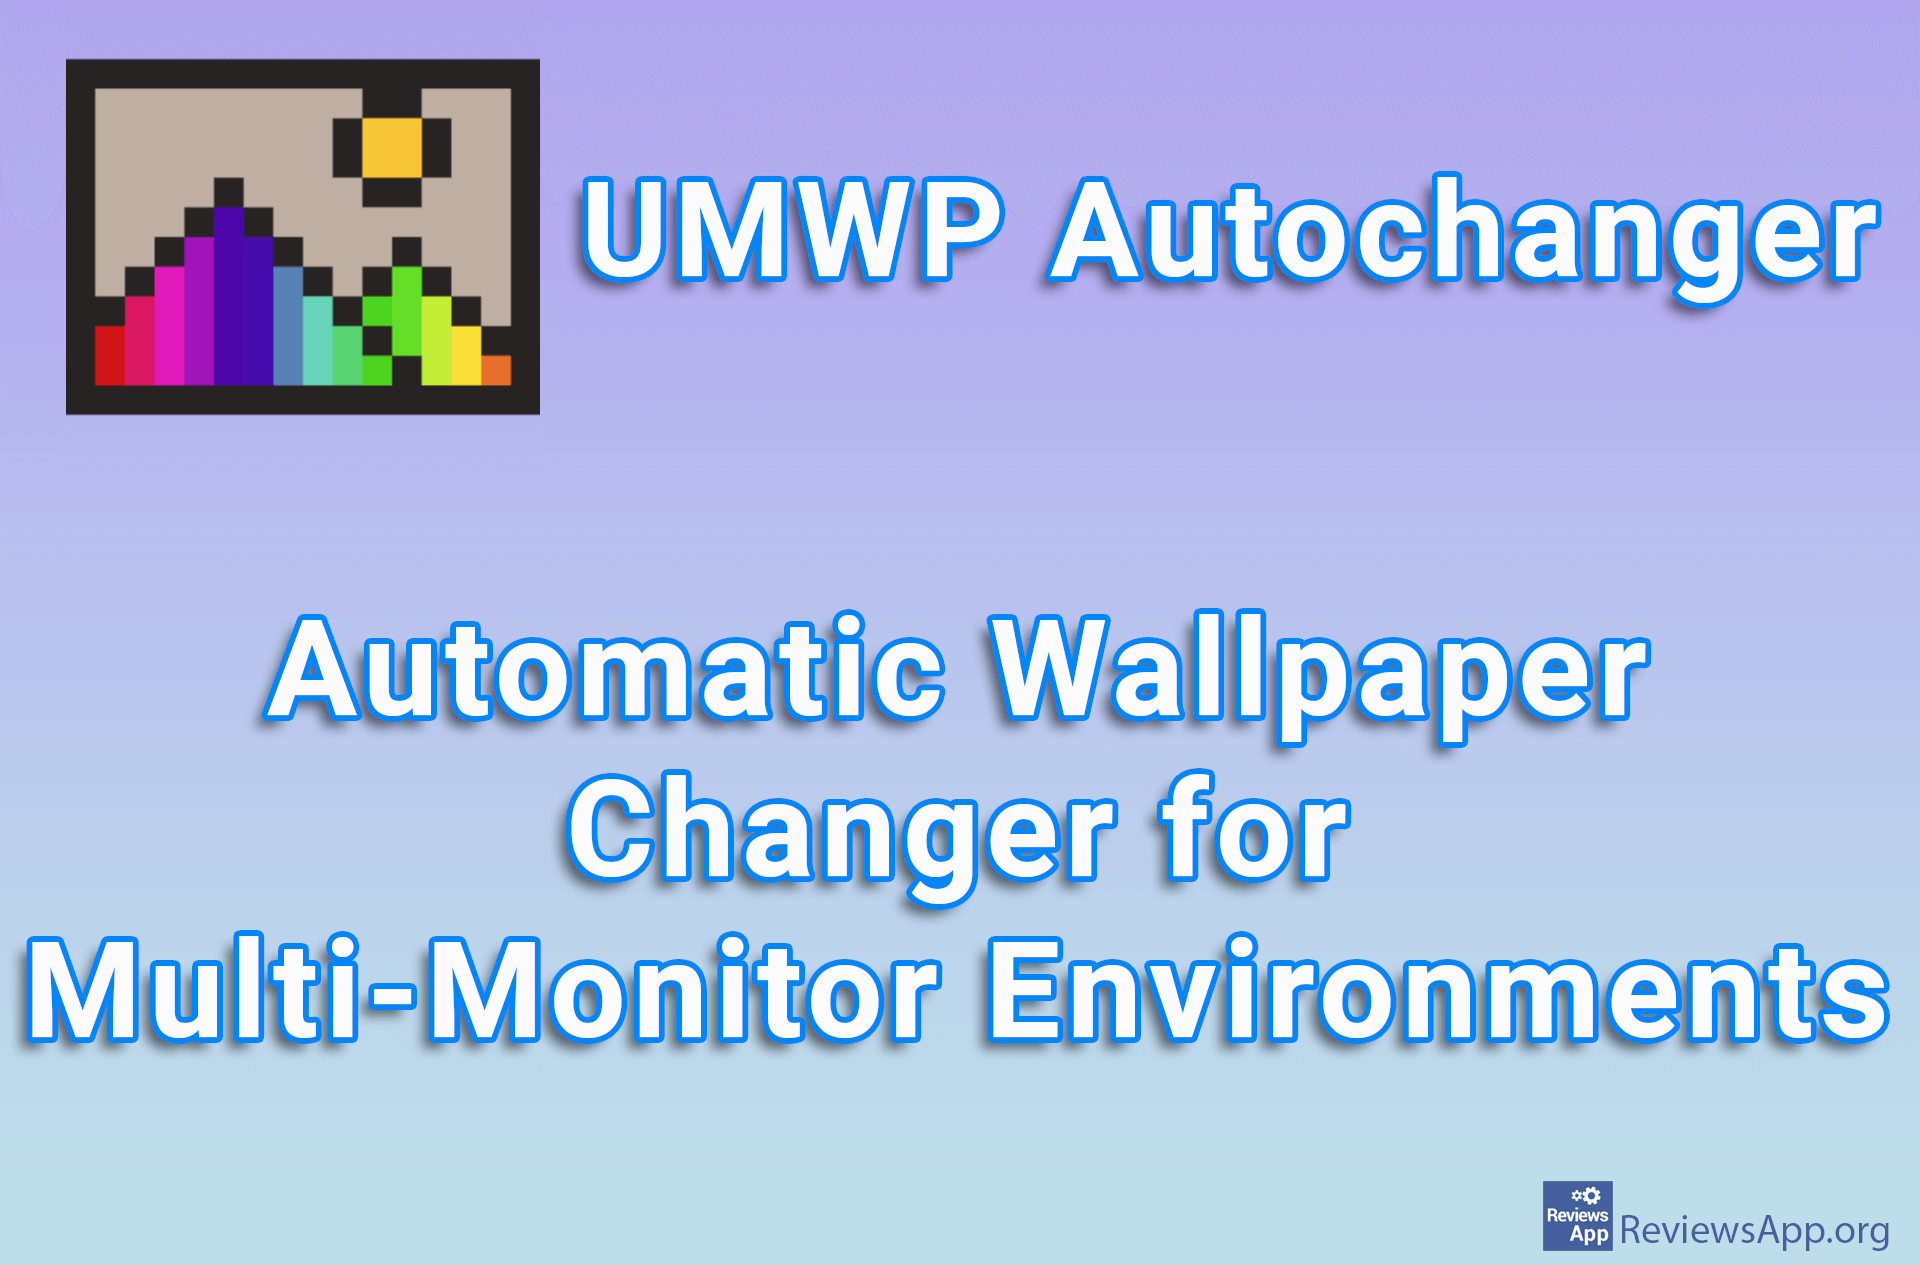 UMWP Autochanger – Automatic Wallpaper Changer for Multi-Monitor Environments